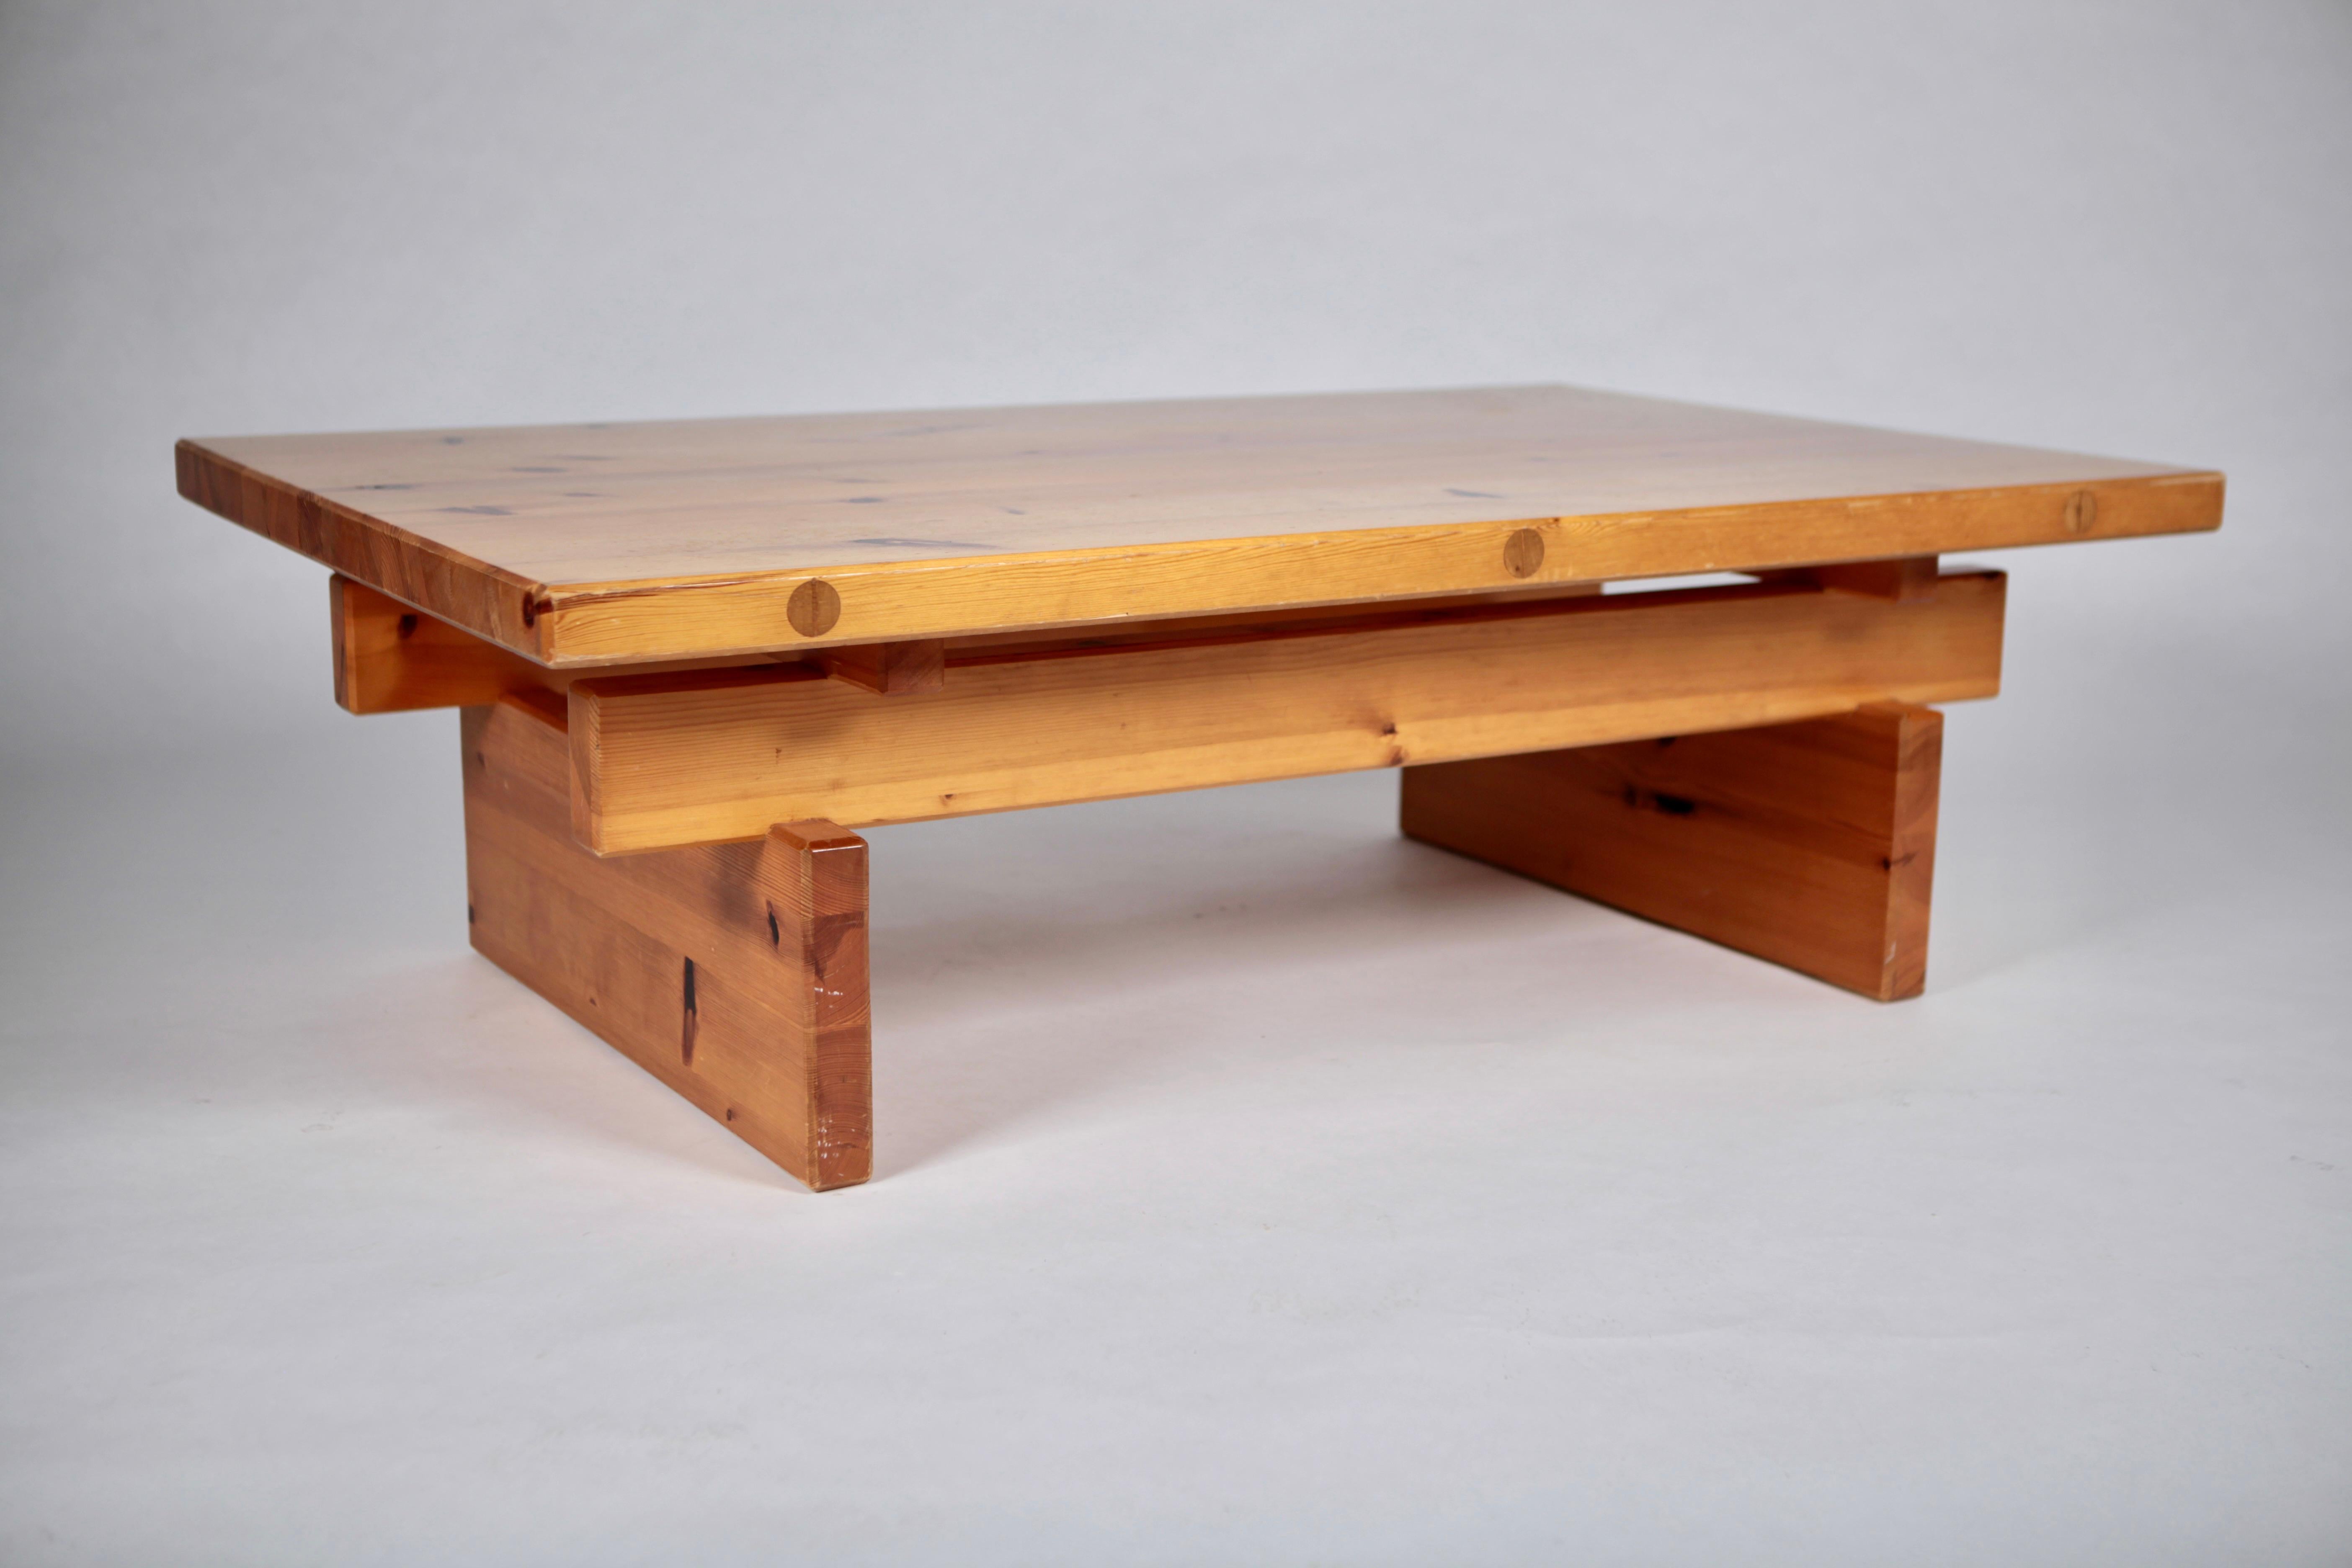 Roland Wilhelmsson, rare coffee or cocktail table in solid pine, executed by Timmermannen in Sweden, 1973.
The table remains in the original condition with very small signs of use.
Extremely sturdy and solid construction.
Great example of modern